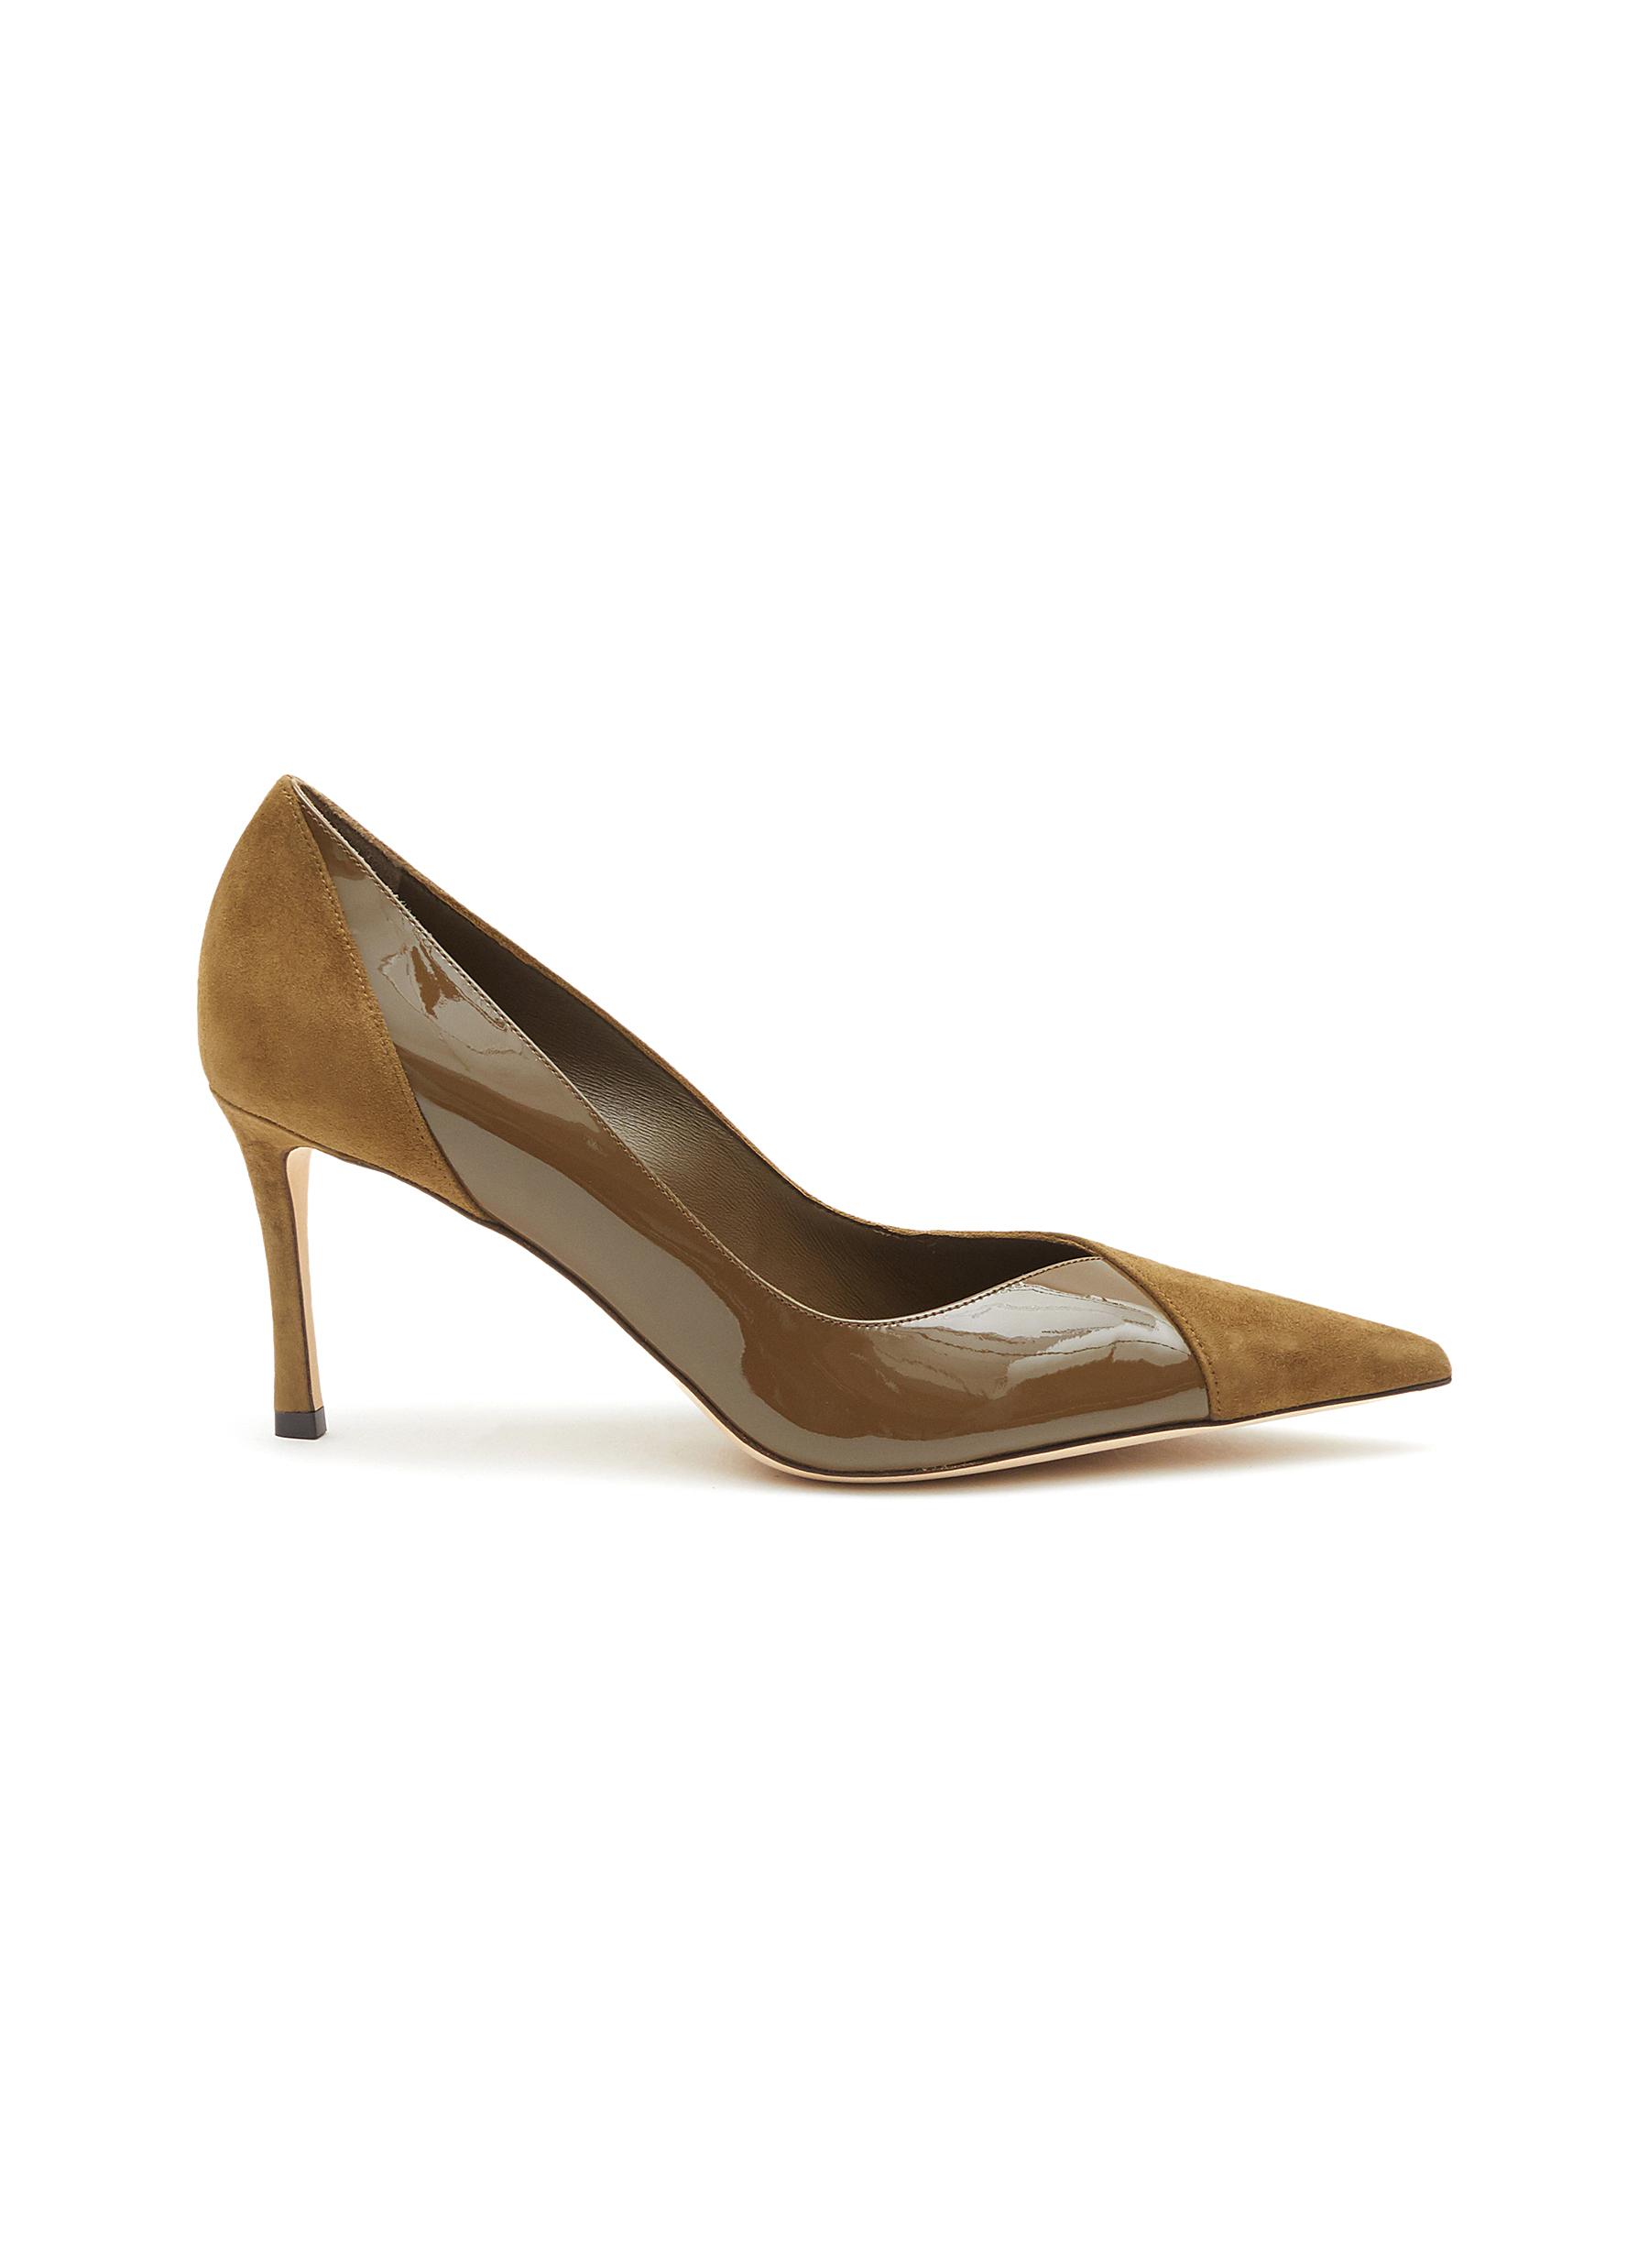 JIMMY CHOO '75 CASS' SUEDE LEATHER PUMPS